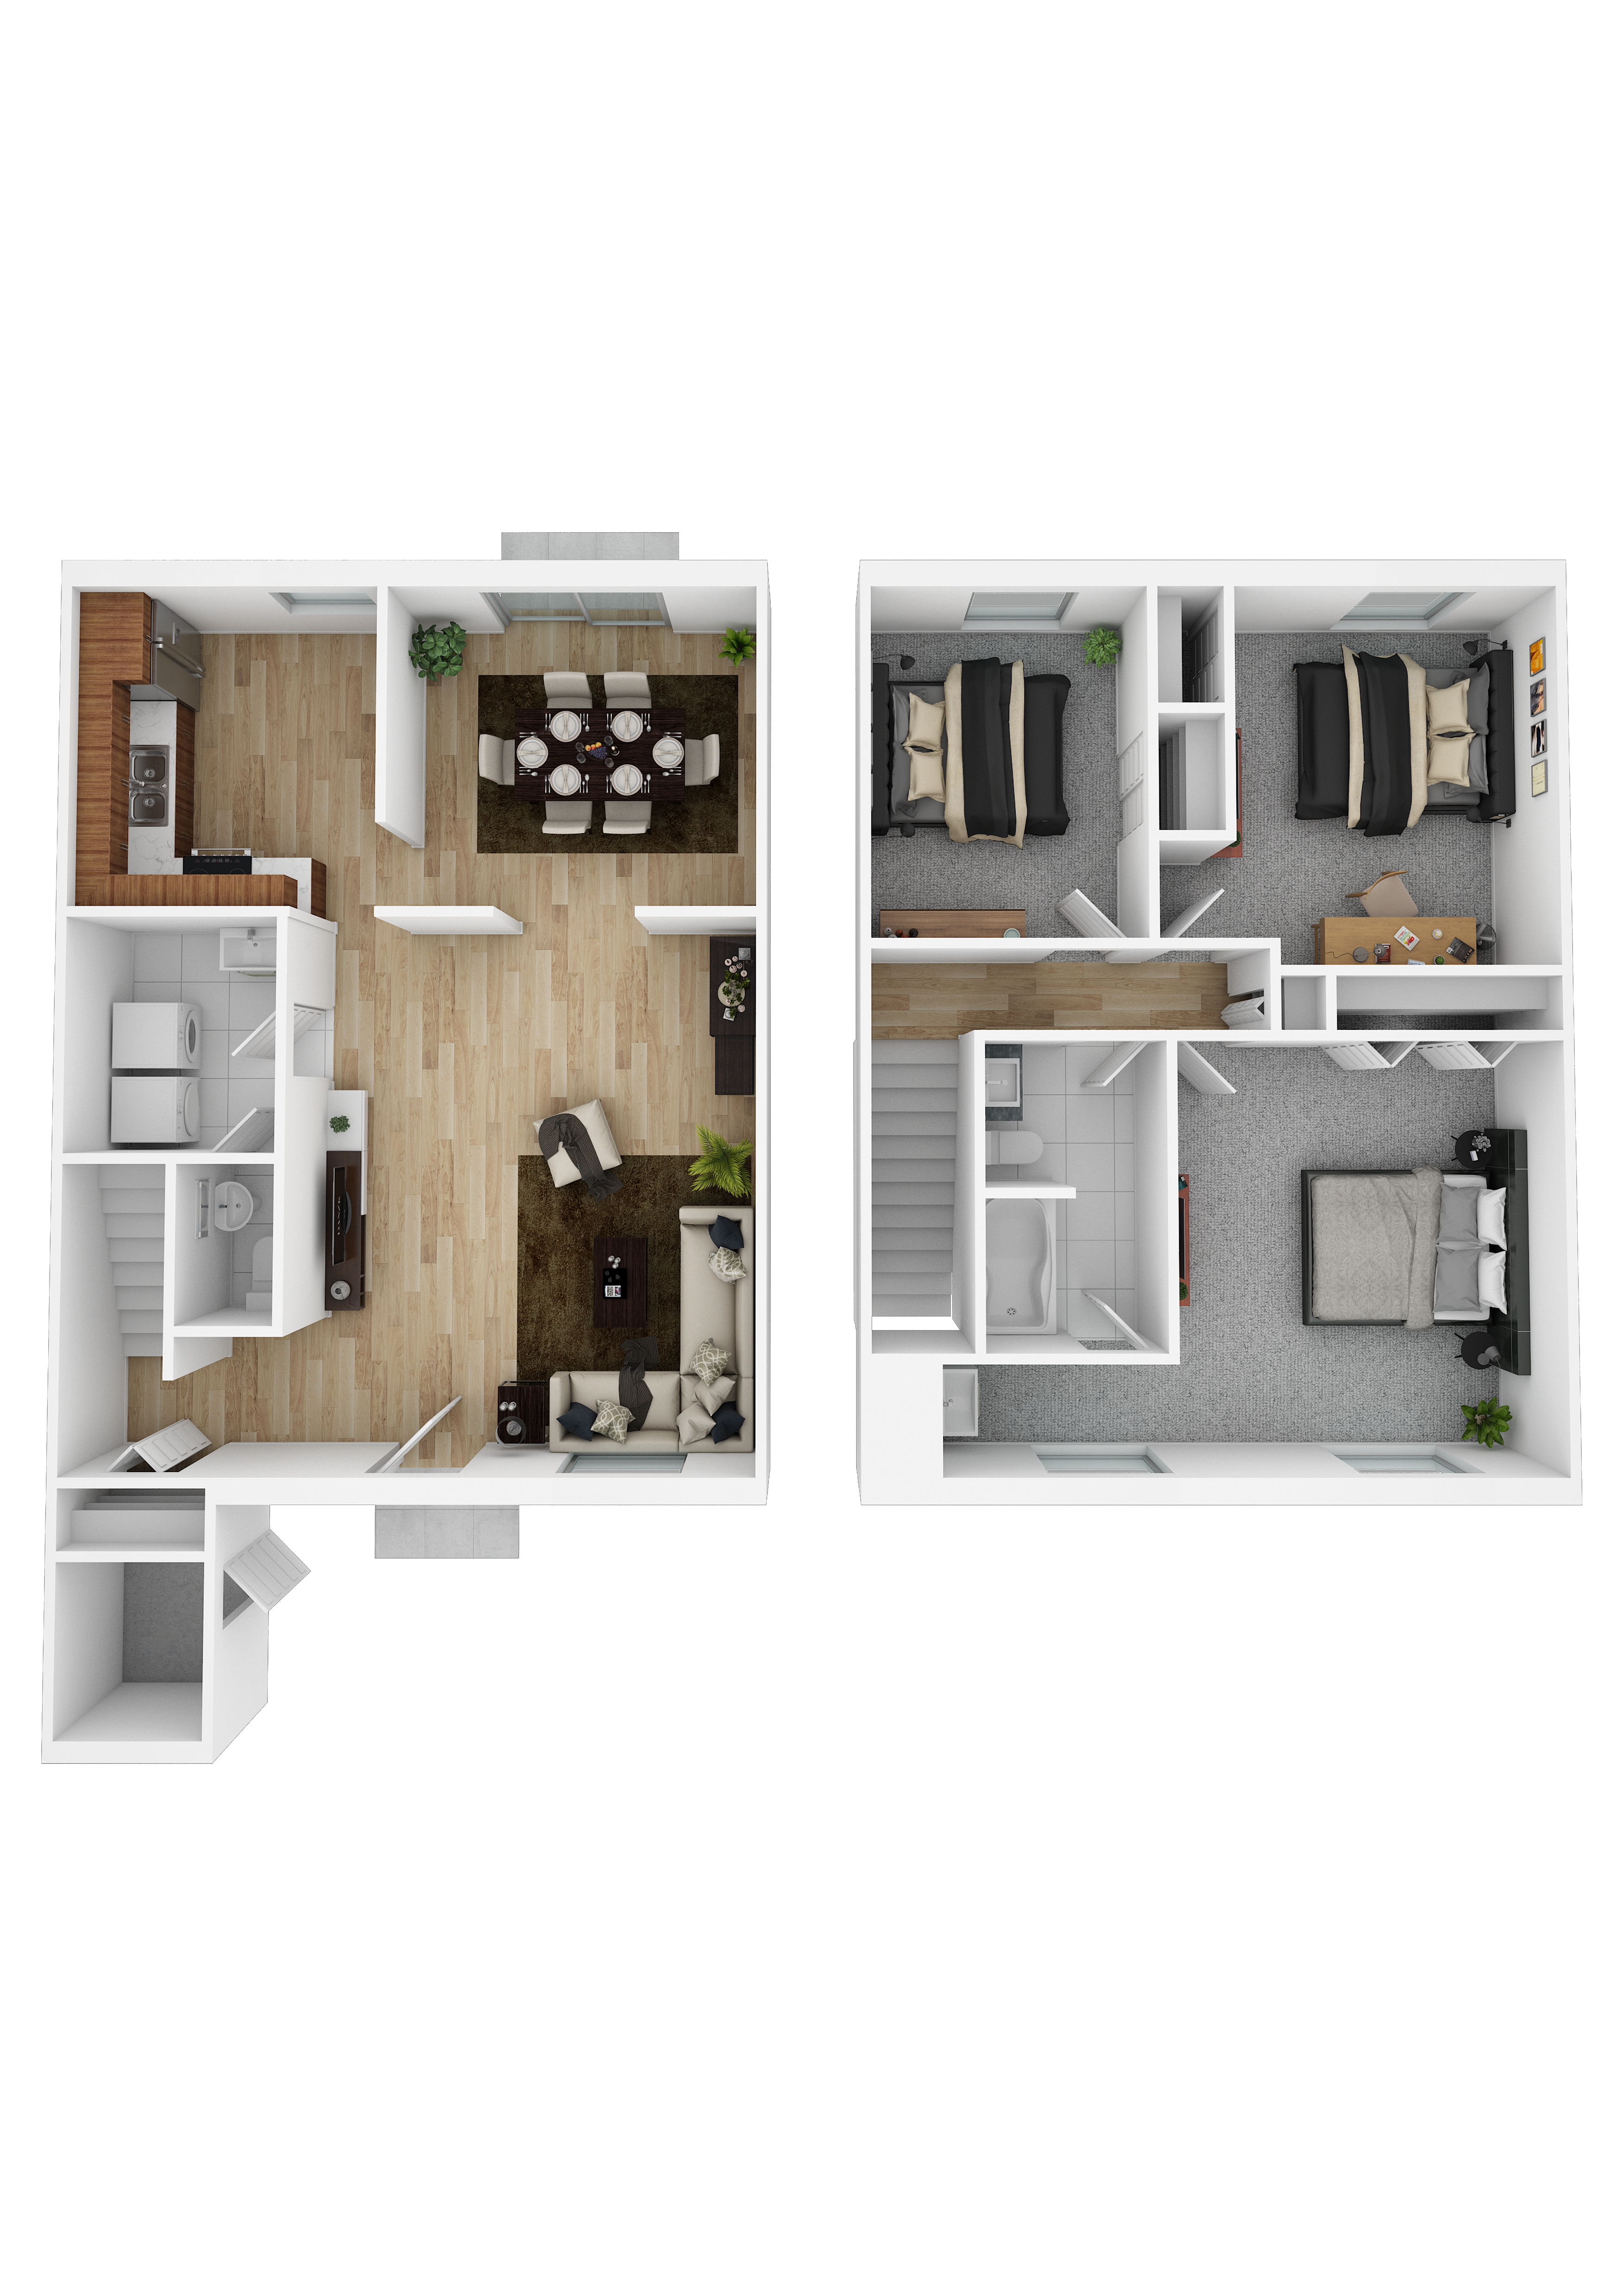 Gateway Airport Townhome Floor plan Style A,Gateway Airport Townhome Floor plan Style A